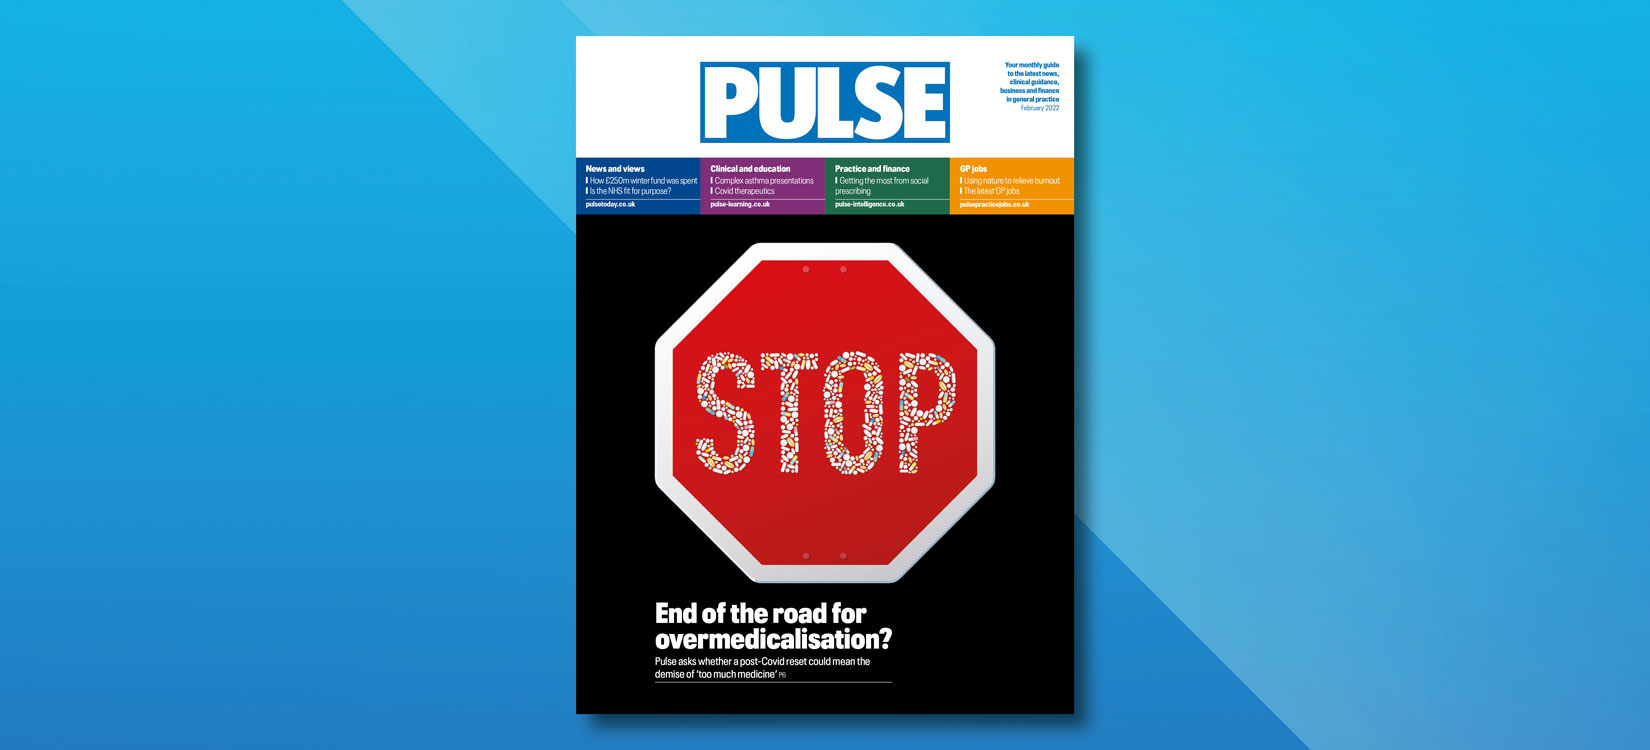 Pulse: End of the road for overmedicalisation?